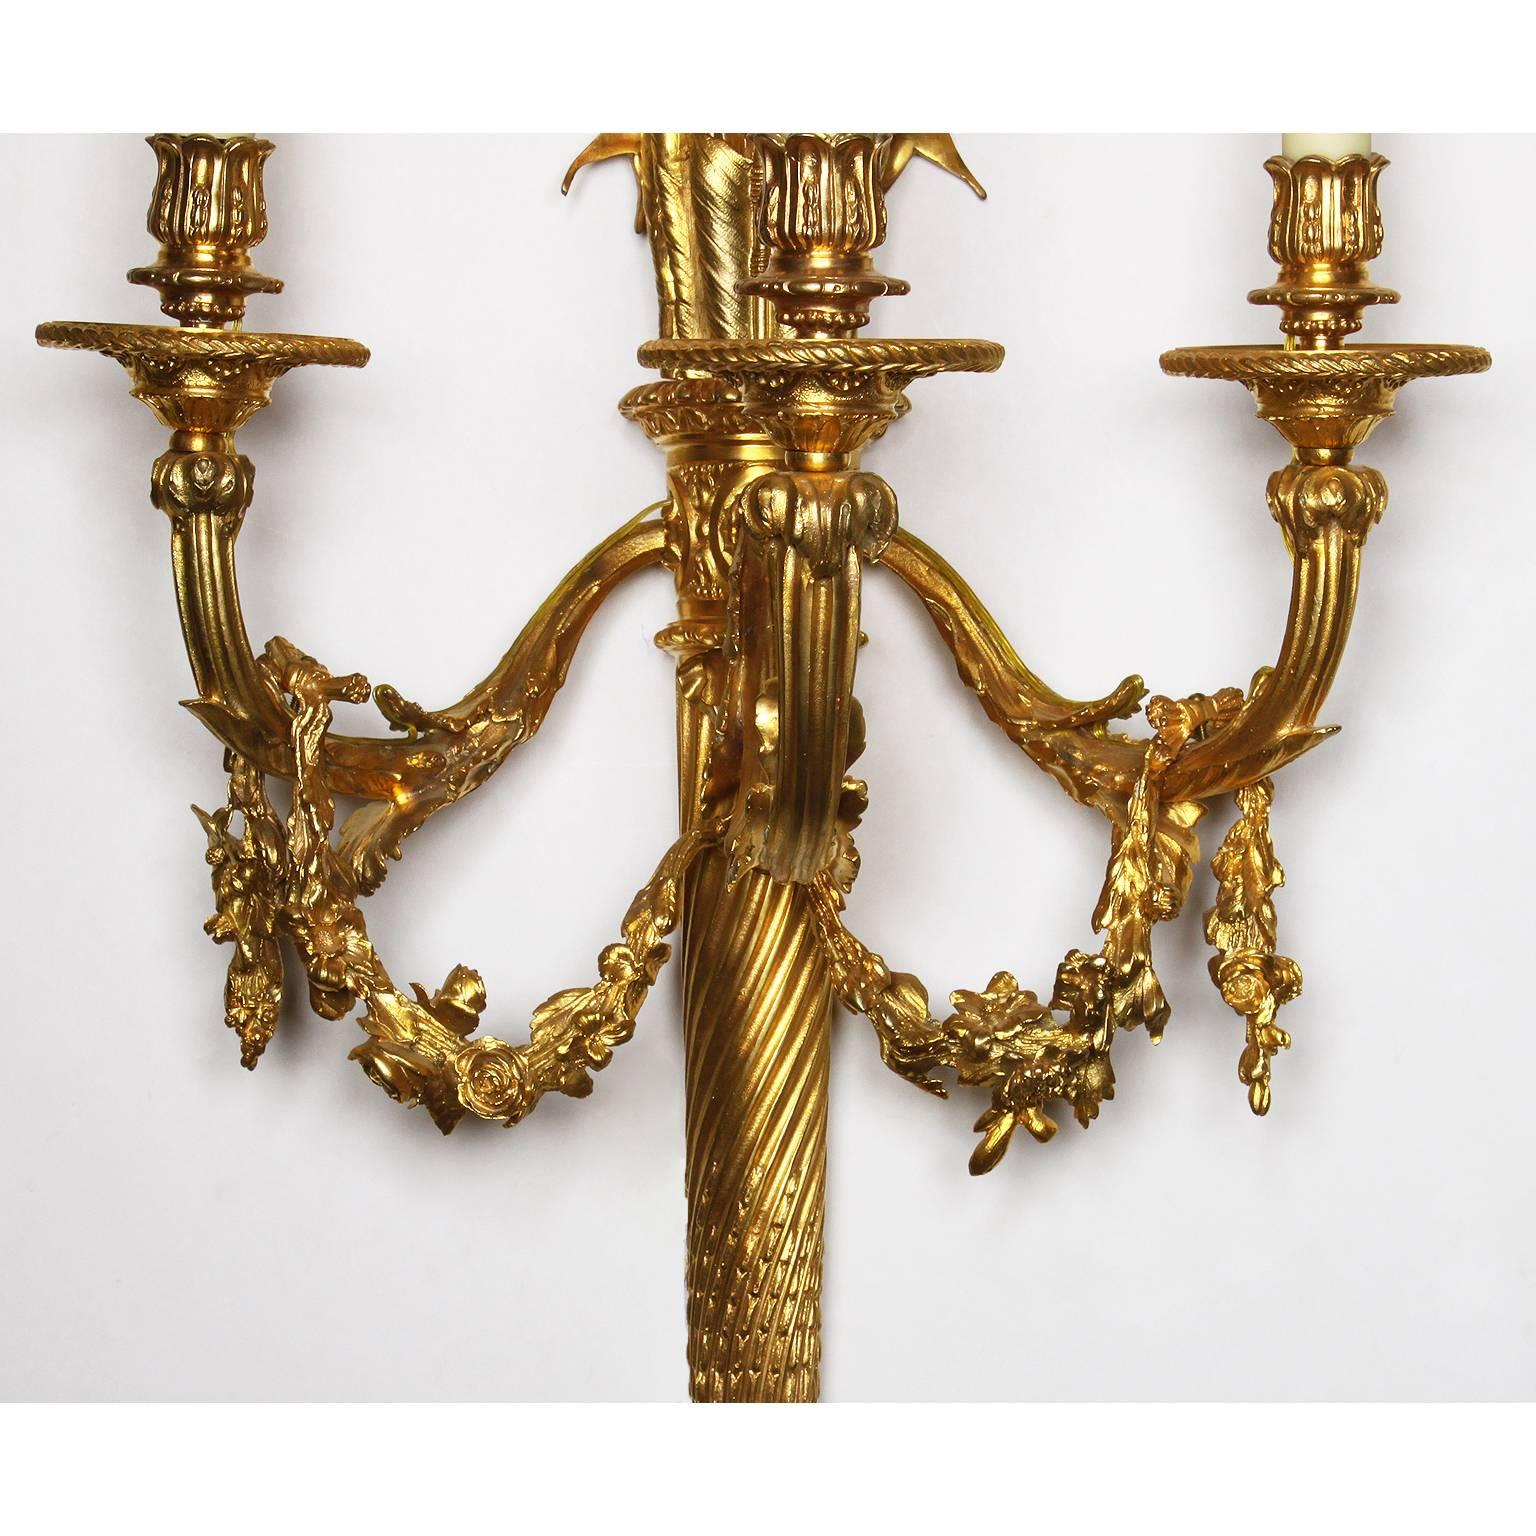 Pair of French 19th-20th Century Louis XVI Style Gilt-Bronze Torch Wall Sconces In Good Condition For Sale In Los Angeles, CA